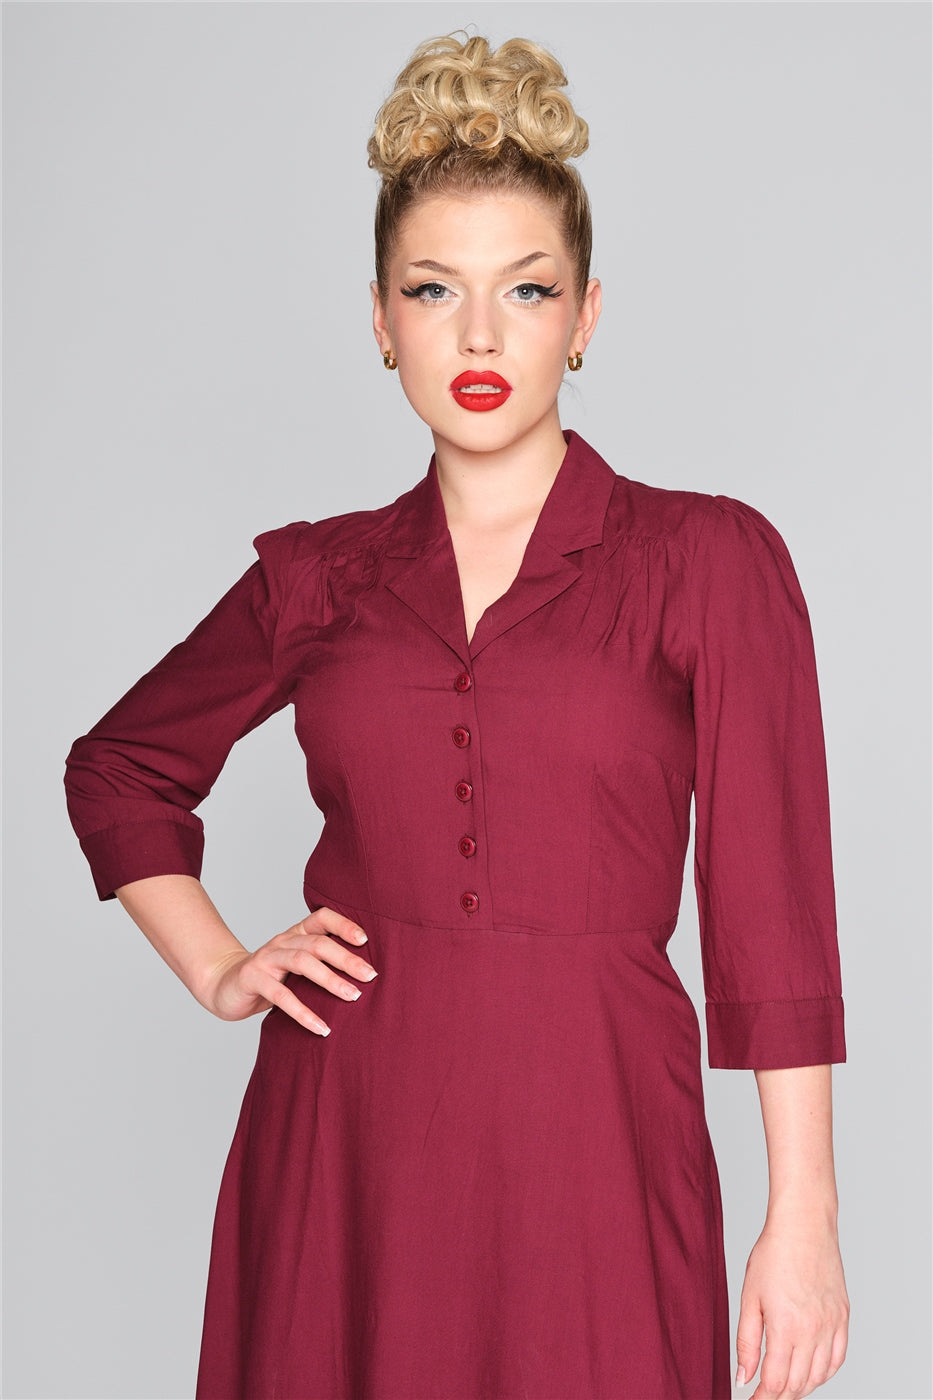 Woman wearing a burgundy 50s dress with a shirt collar and button front with a hand on her hip